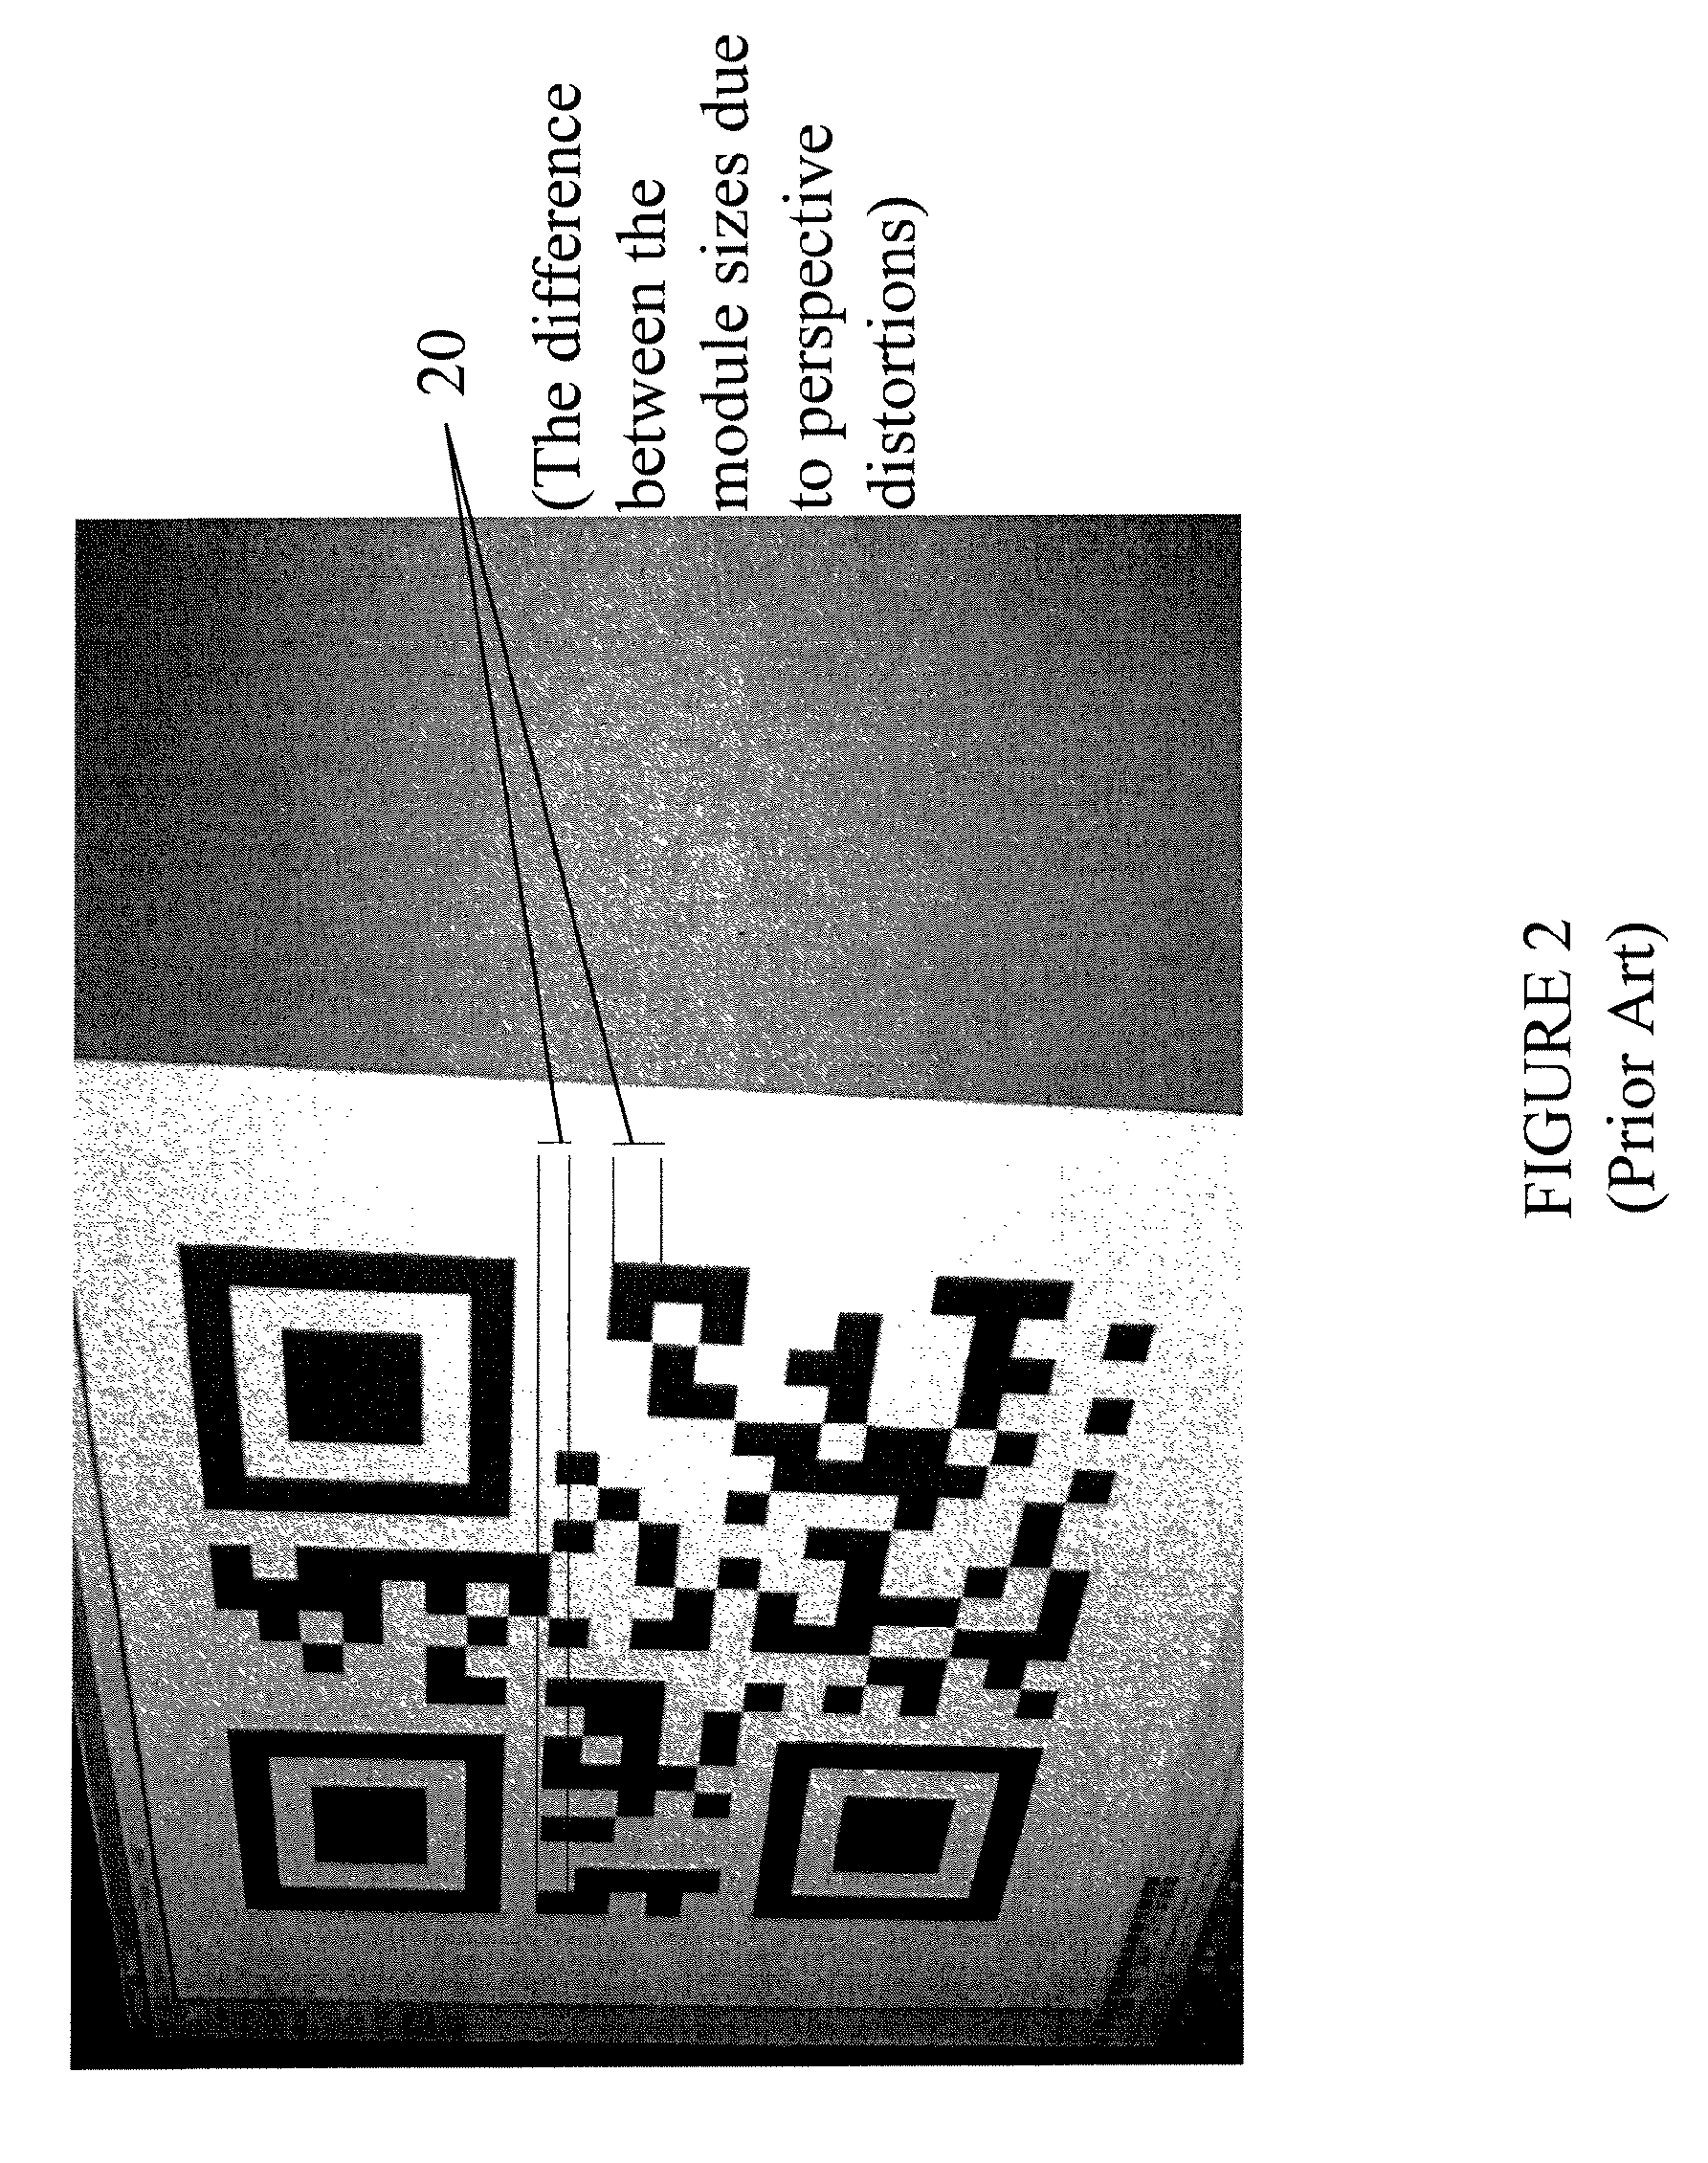 Method and system for creating and using barcodes